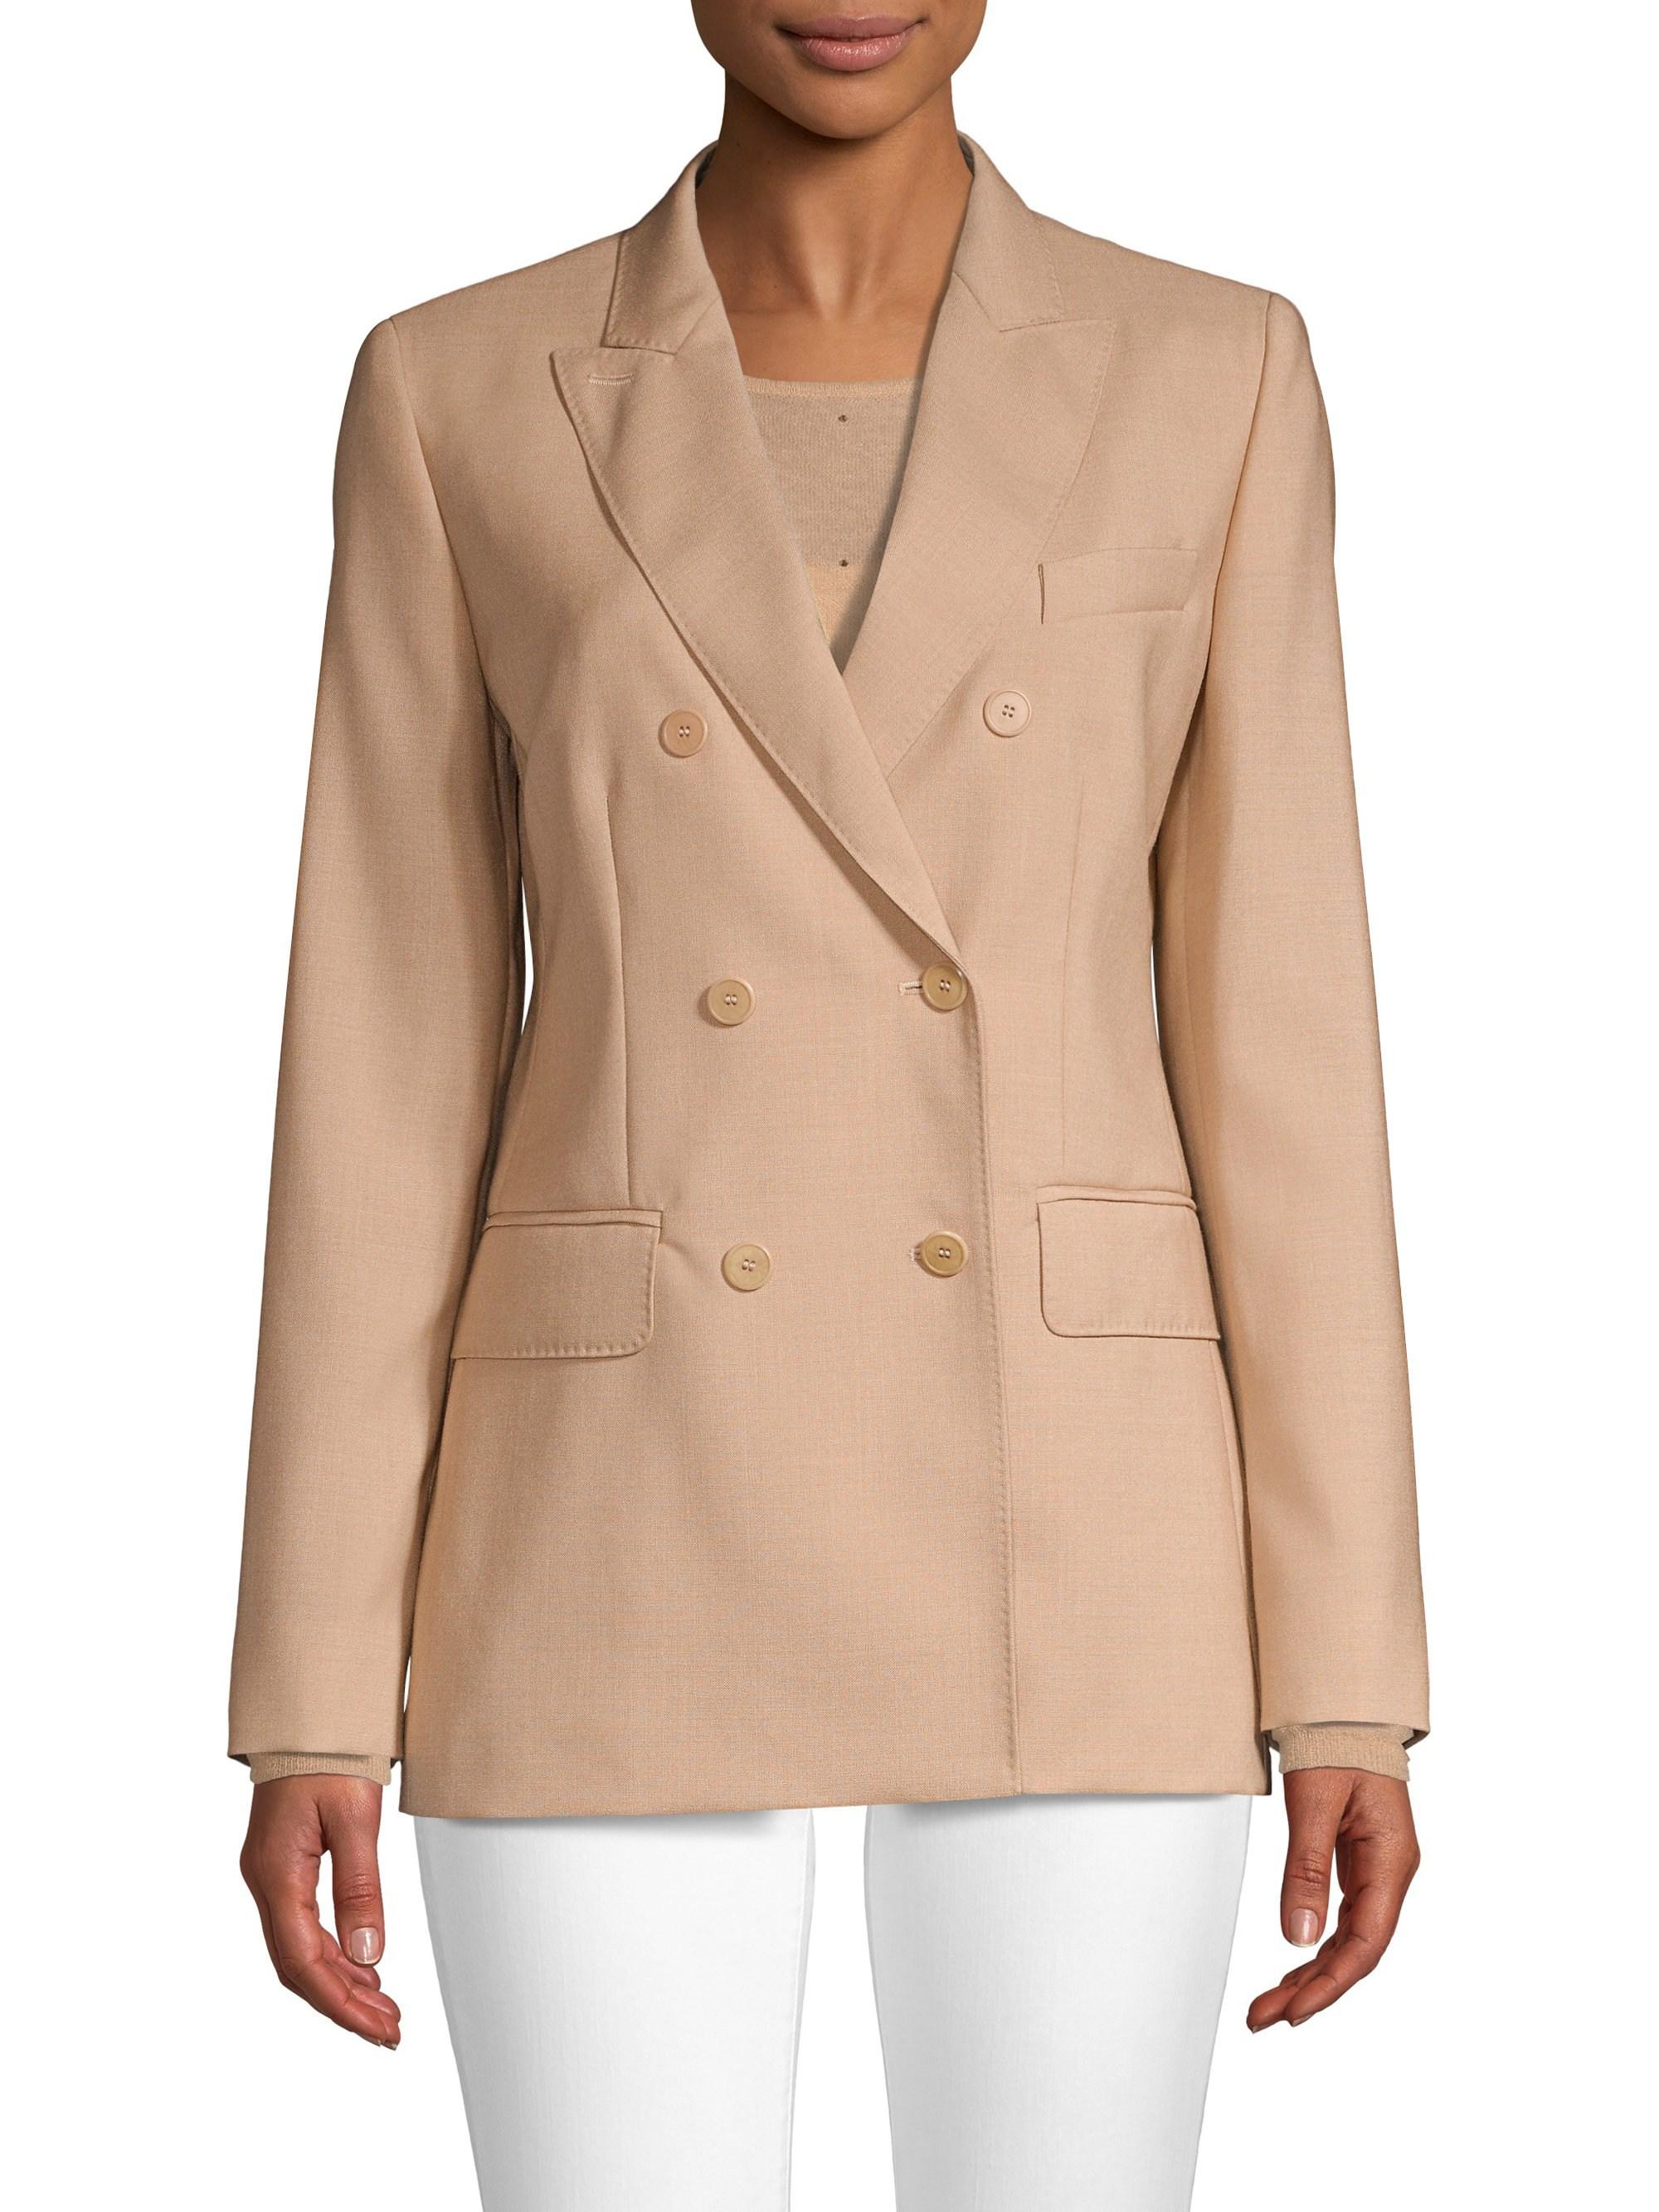 Lyst - Max Mara Daniel Double-breasted Mohair & Silk Jacket in Natural